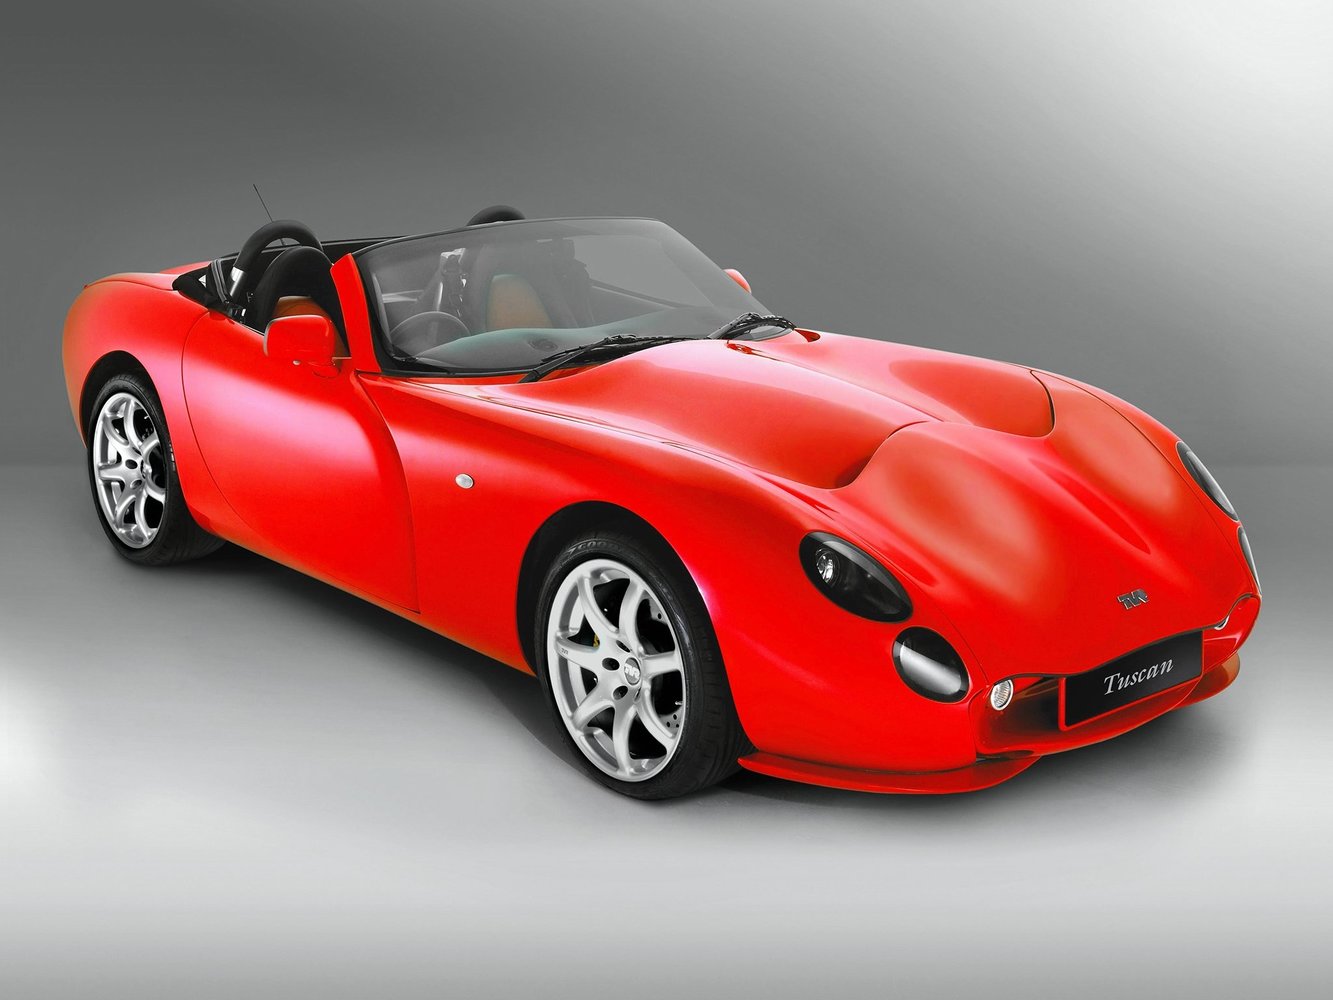 tvr TVR Tuscan